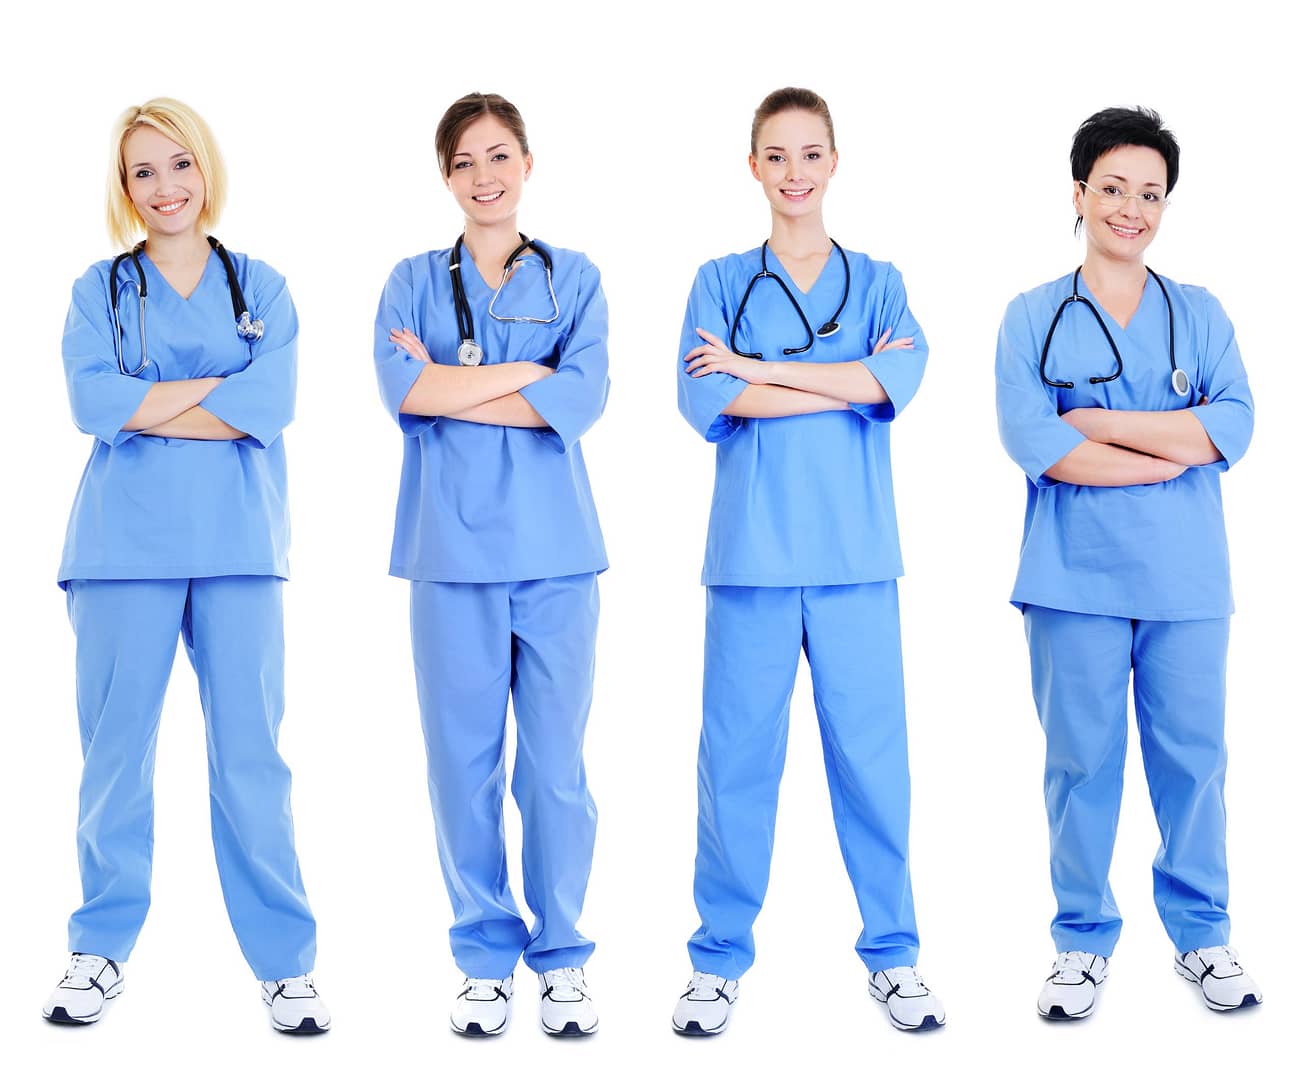 Hospital Garments Suppliers in New York